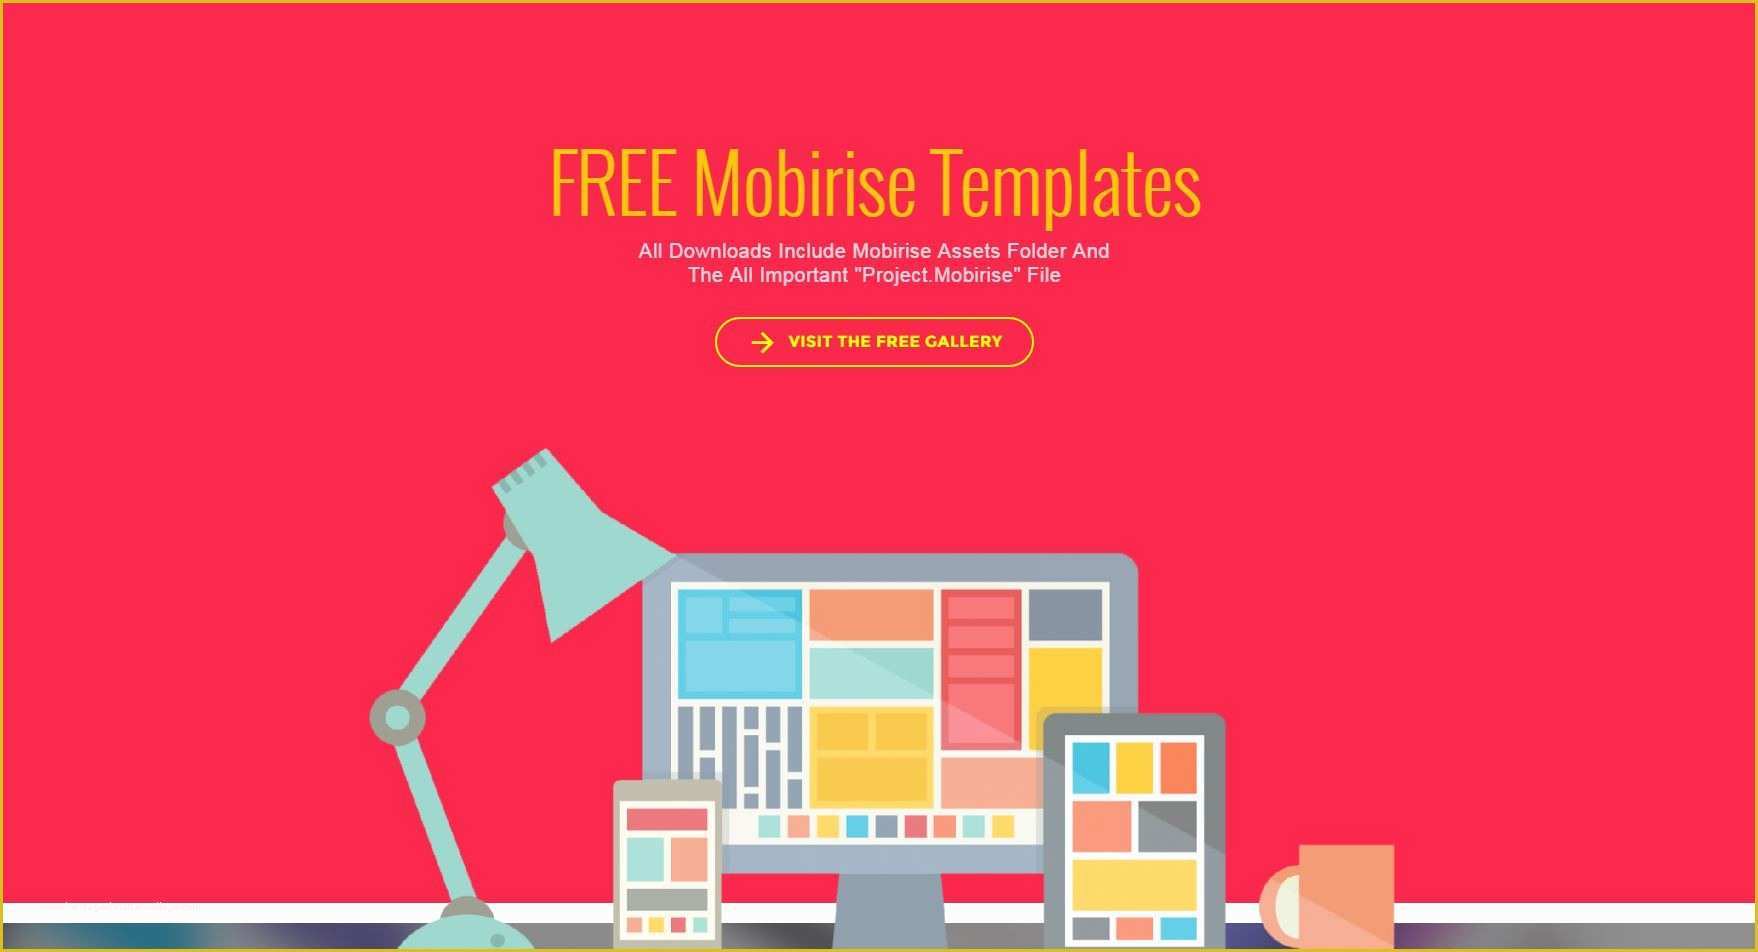 Discussion forum Templates Free Download Of Free Mobirise Templates for Download Mobirise forums